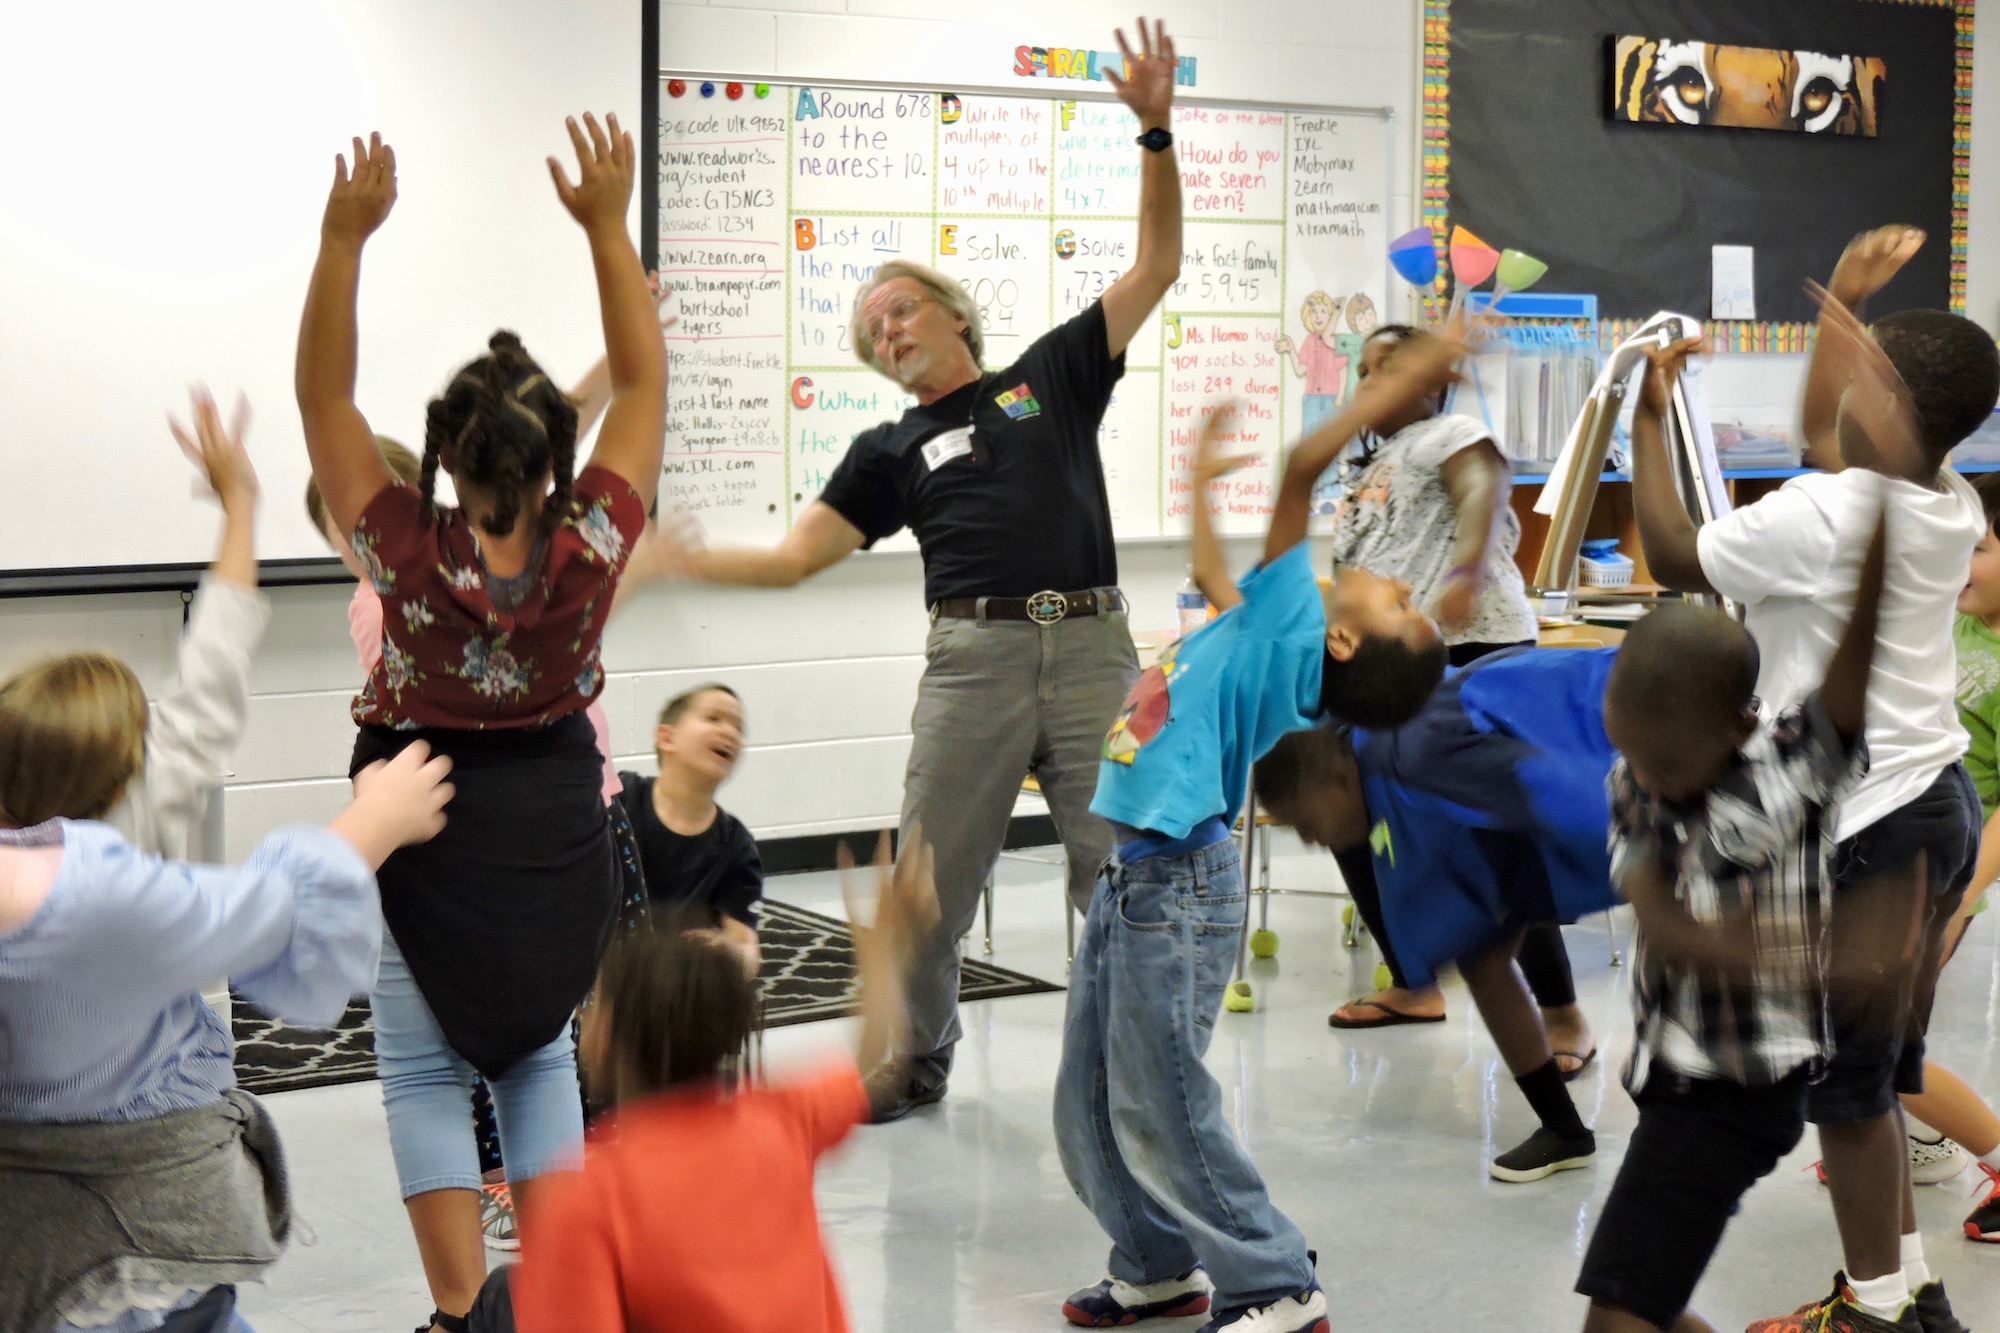 Kennedy Center for the Performing Arts teaching artist Randy Barron leads local students through an arts integration exercise. (Photo credit: Janice Crews / APSU)